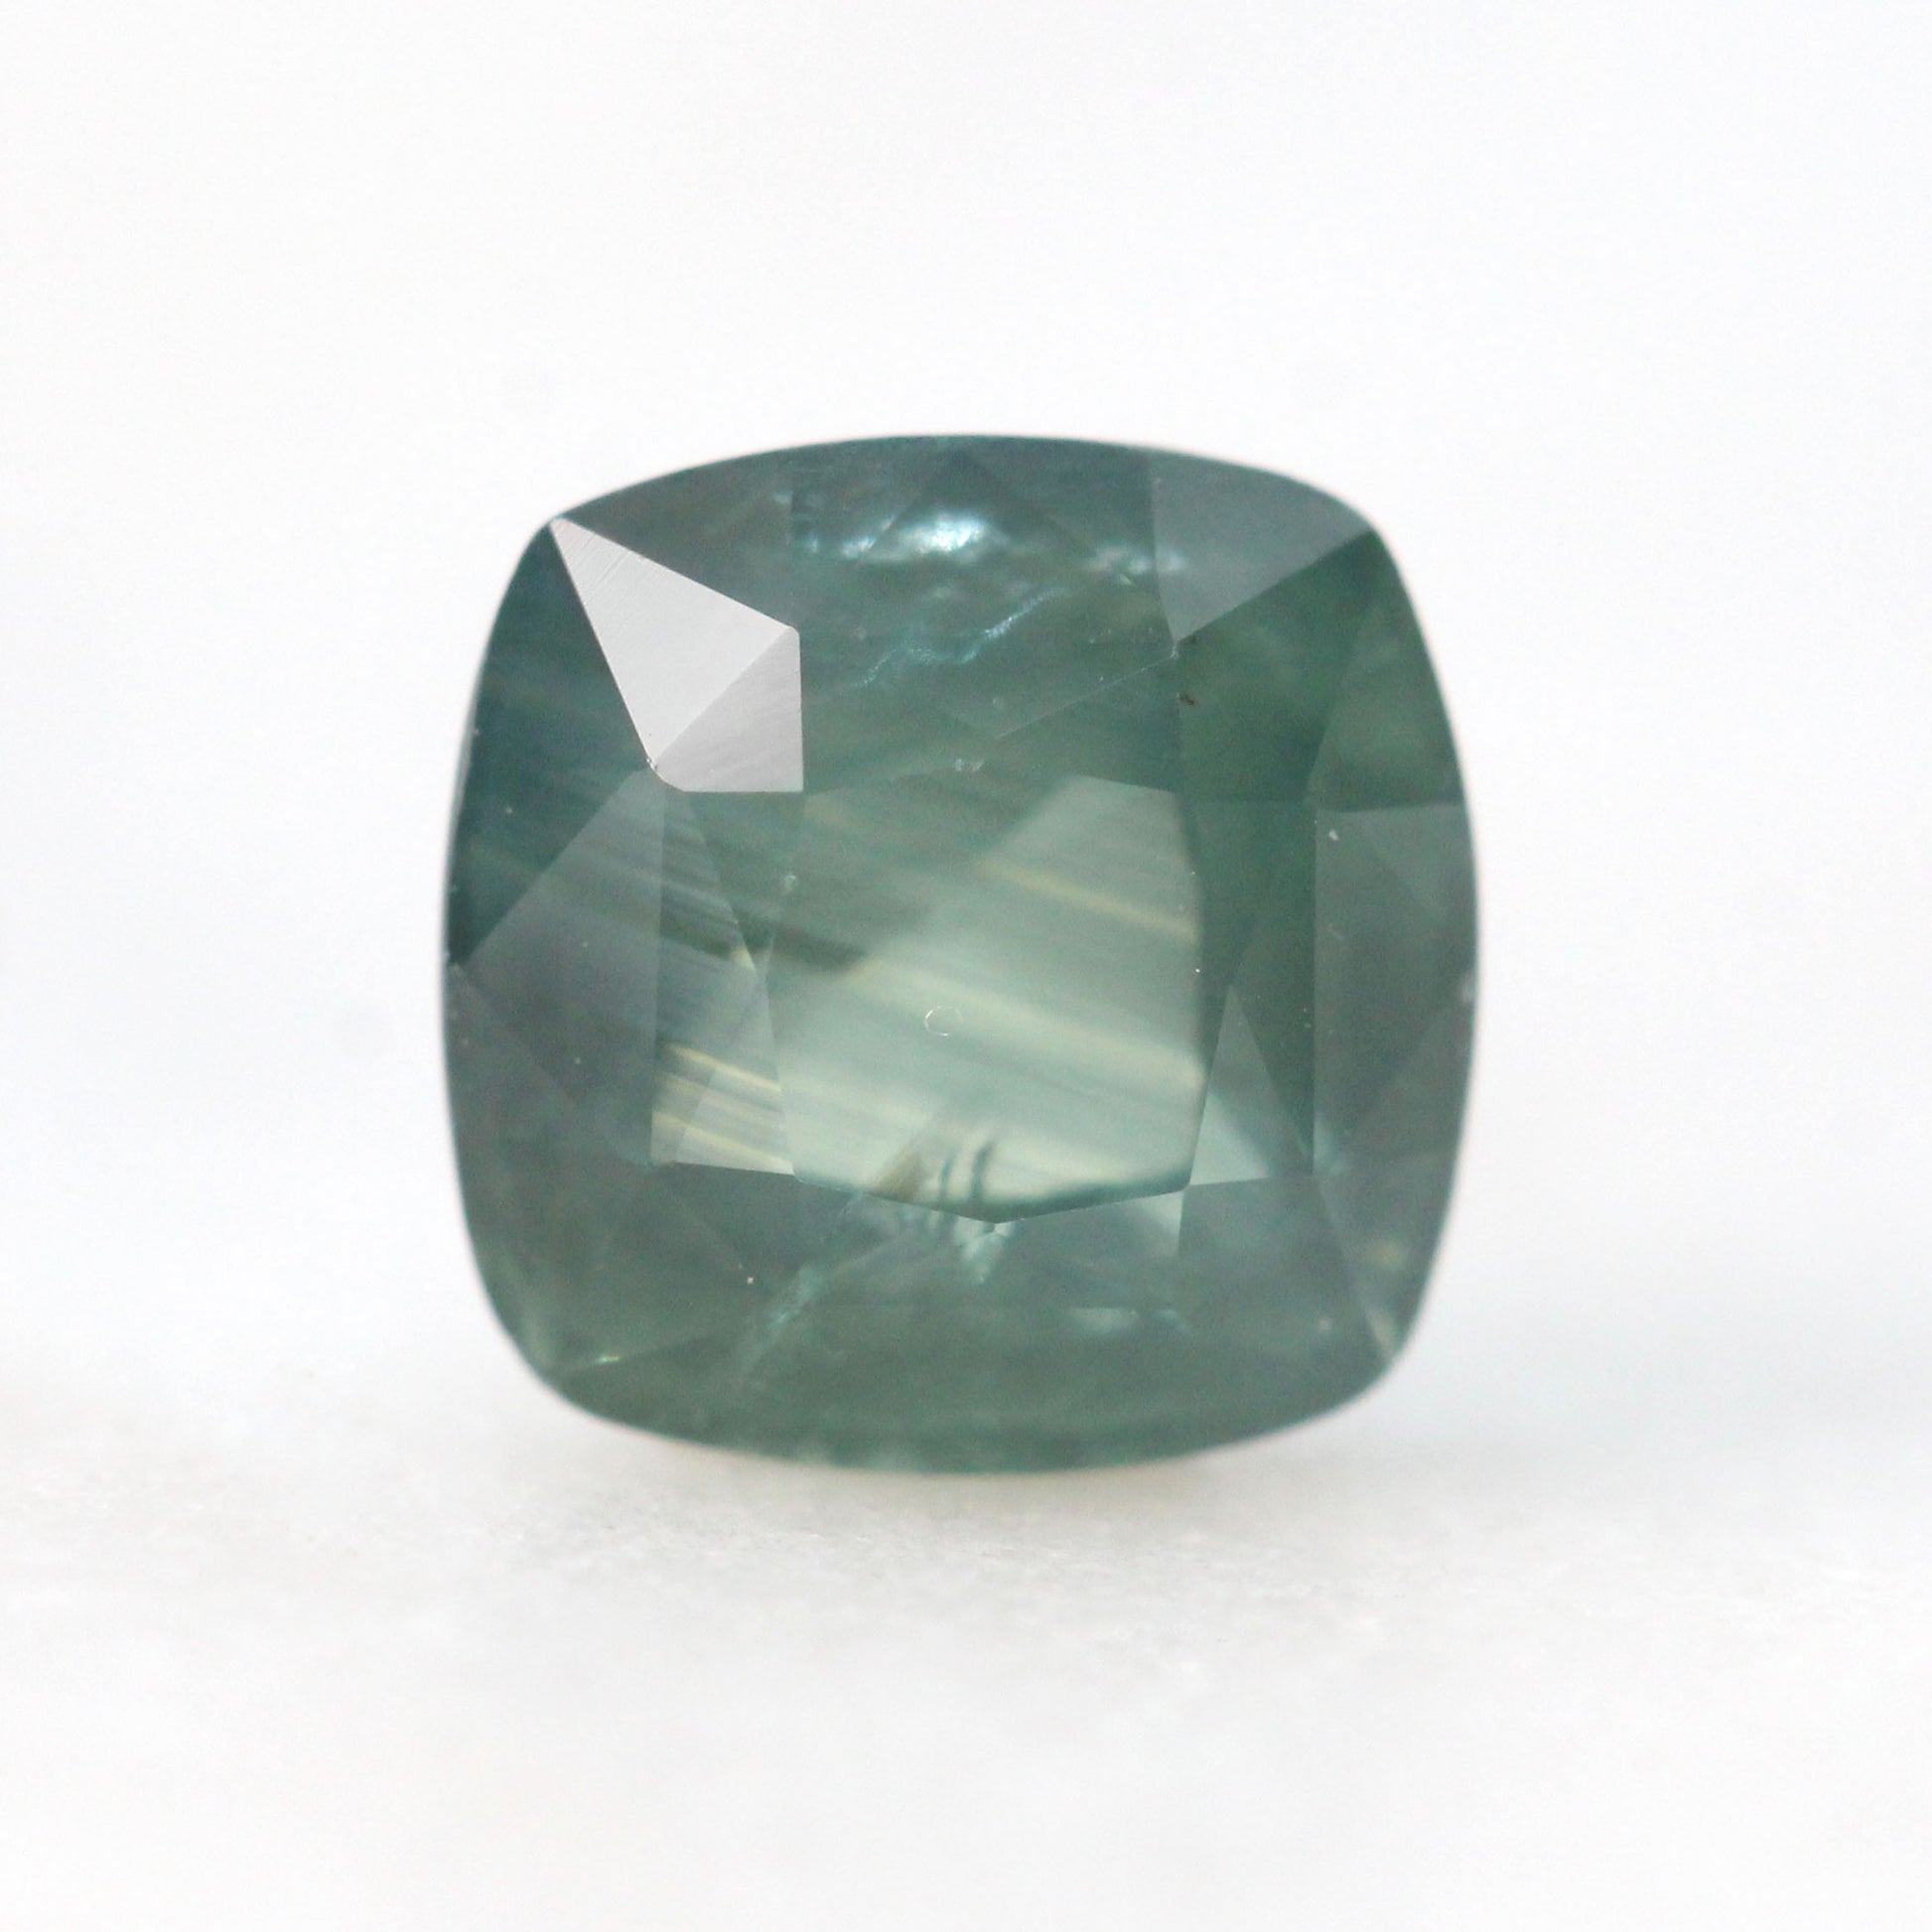 1.47 Carat Light Teal Cushion Sapphire for Custom Work - Inventory Code TCS147 - Midwinter Co. Alternative Bridal Rings and Modern Fine Jewelry